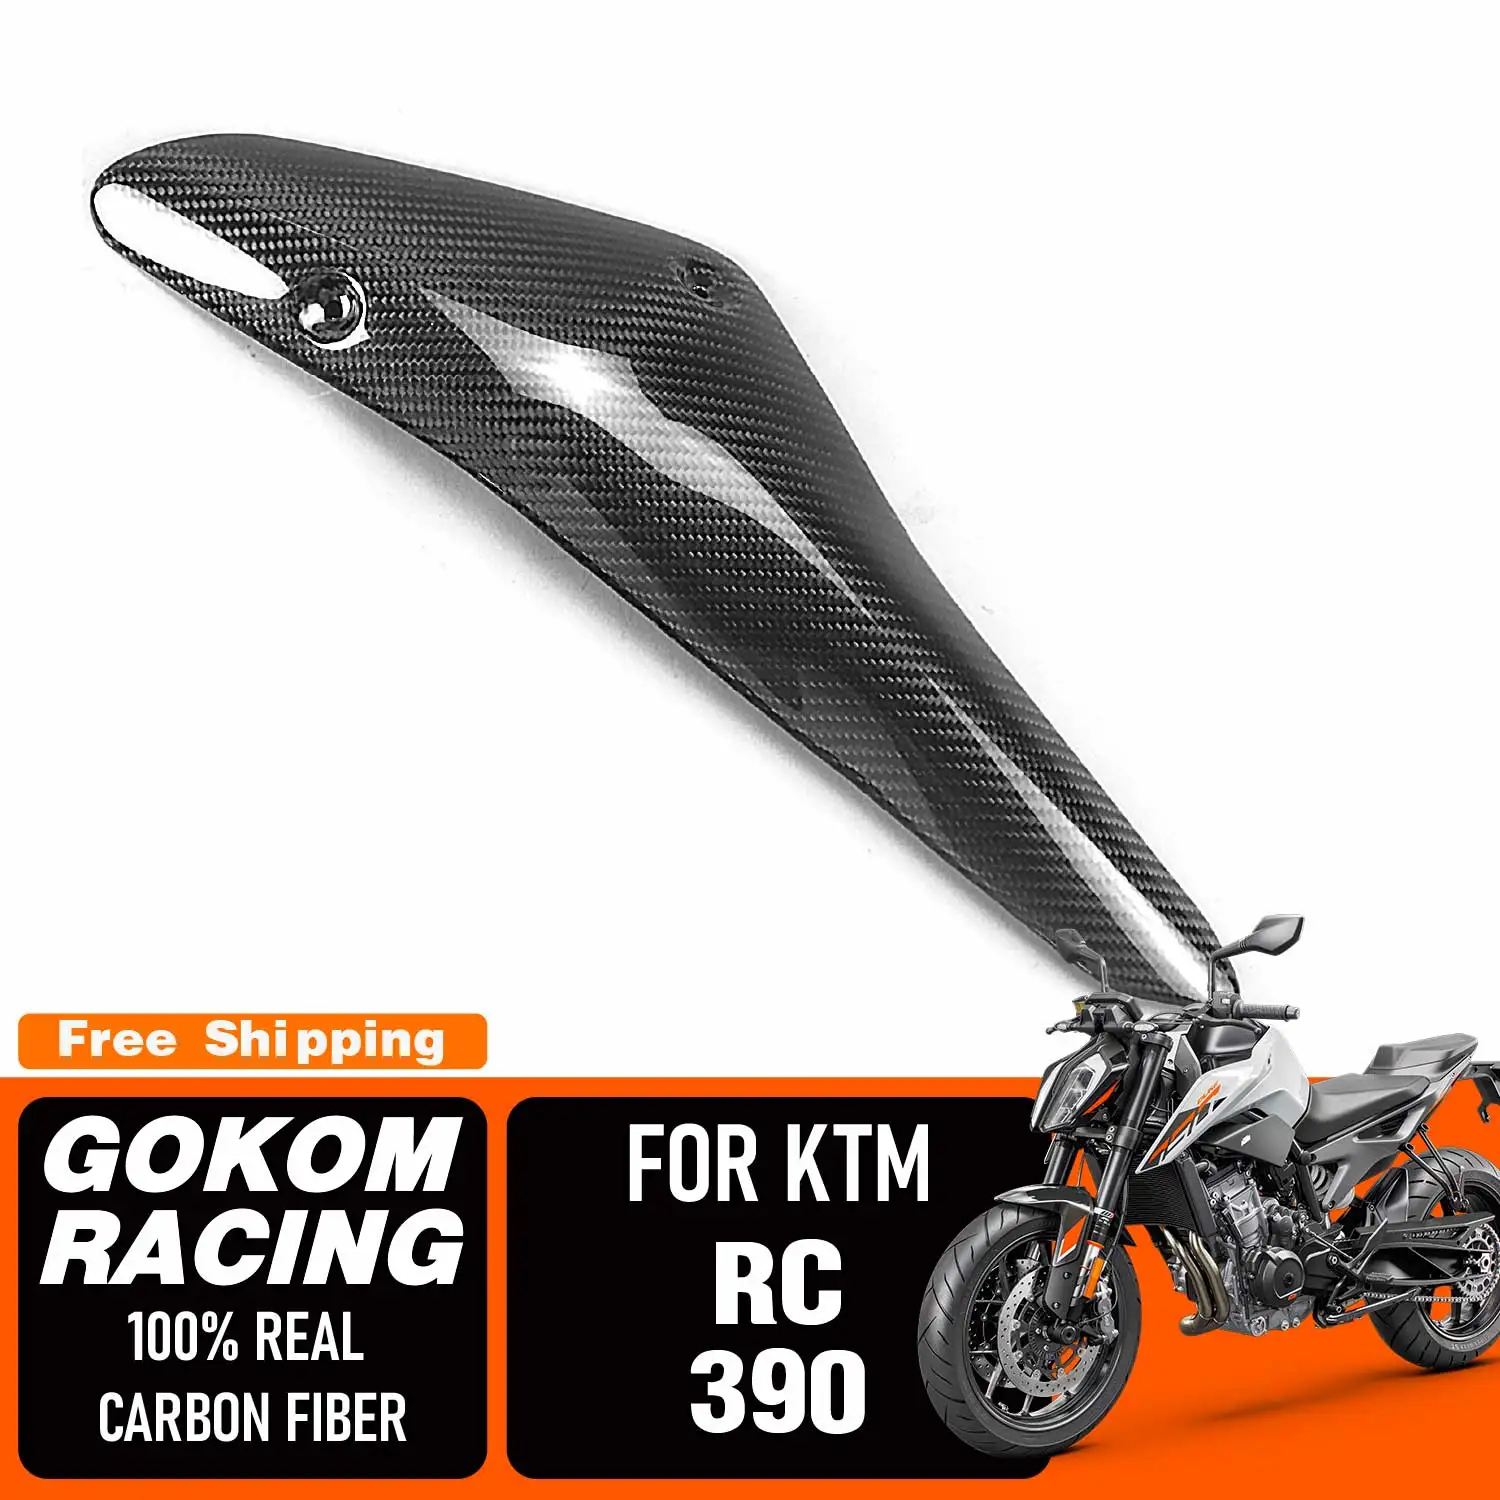 

Gokom Racing For KTM DUKE 790 Exhaust protection Cover COWLING FAIRING 100% REAL CARBON FIBER MOTORCYCLE ACCESSORIES